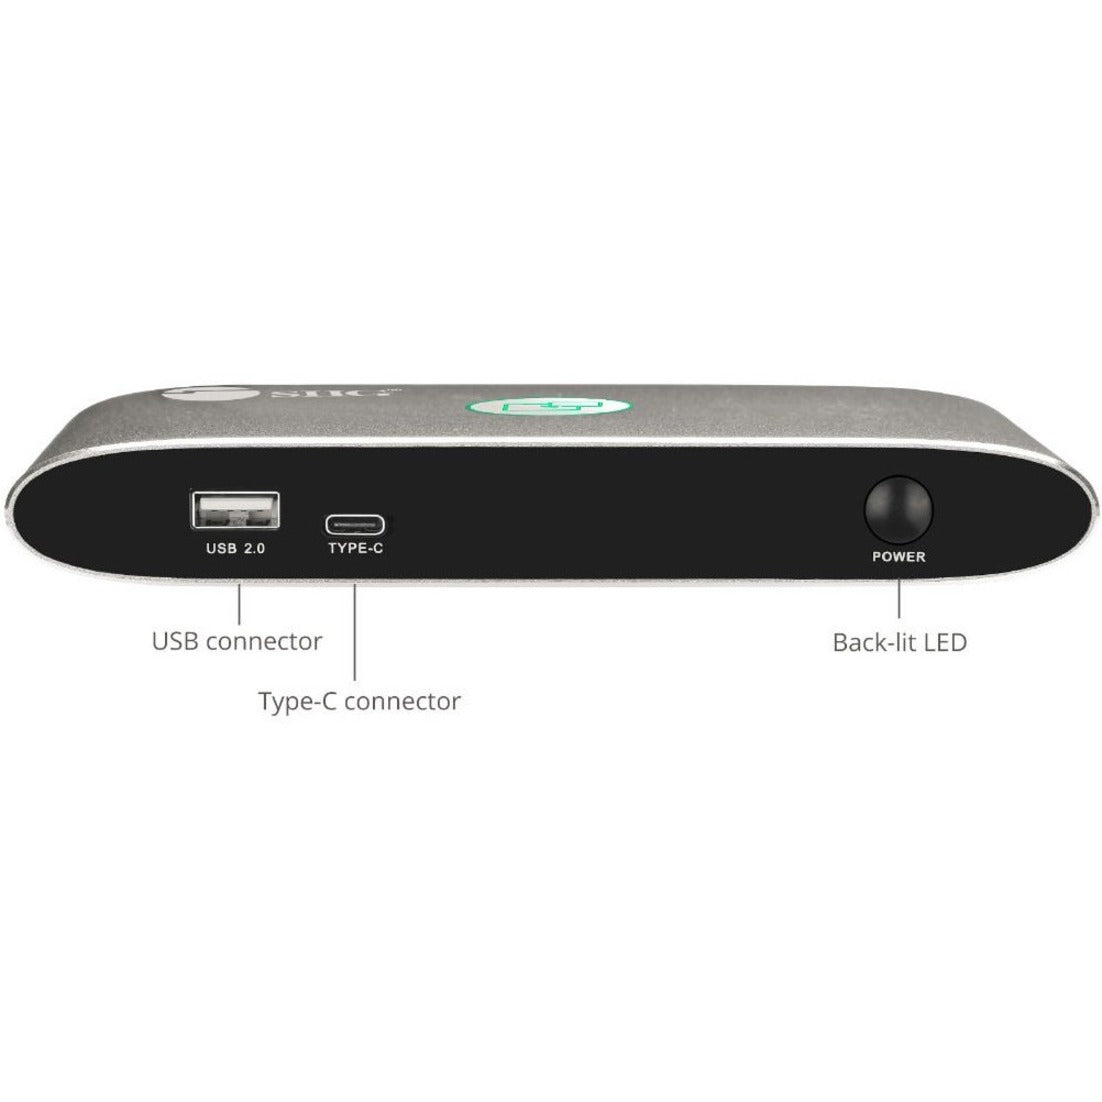 SIIG CE-H26611-S1 Dual View Wireless Media Presentation Kit, Dual Head Pen Drive, HDMI Dongle, 2 Year Warranty